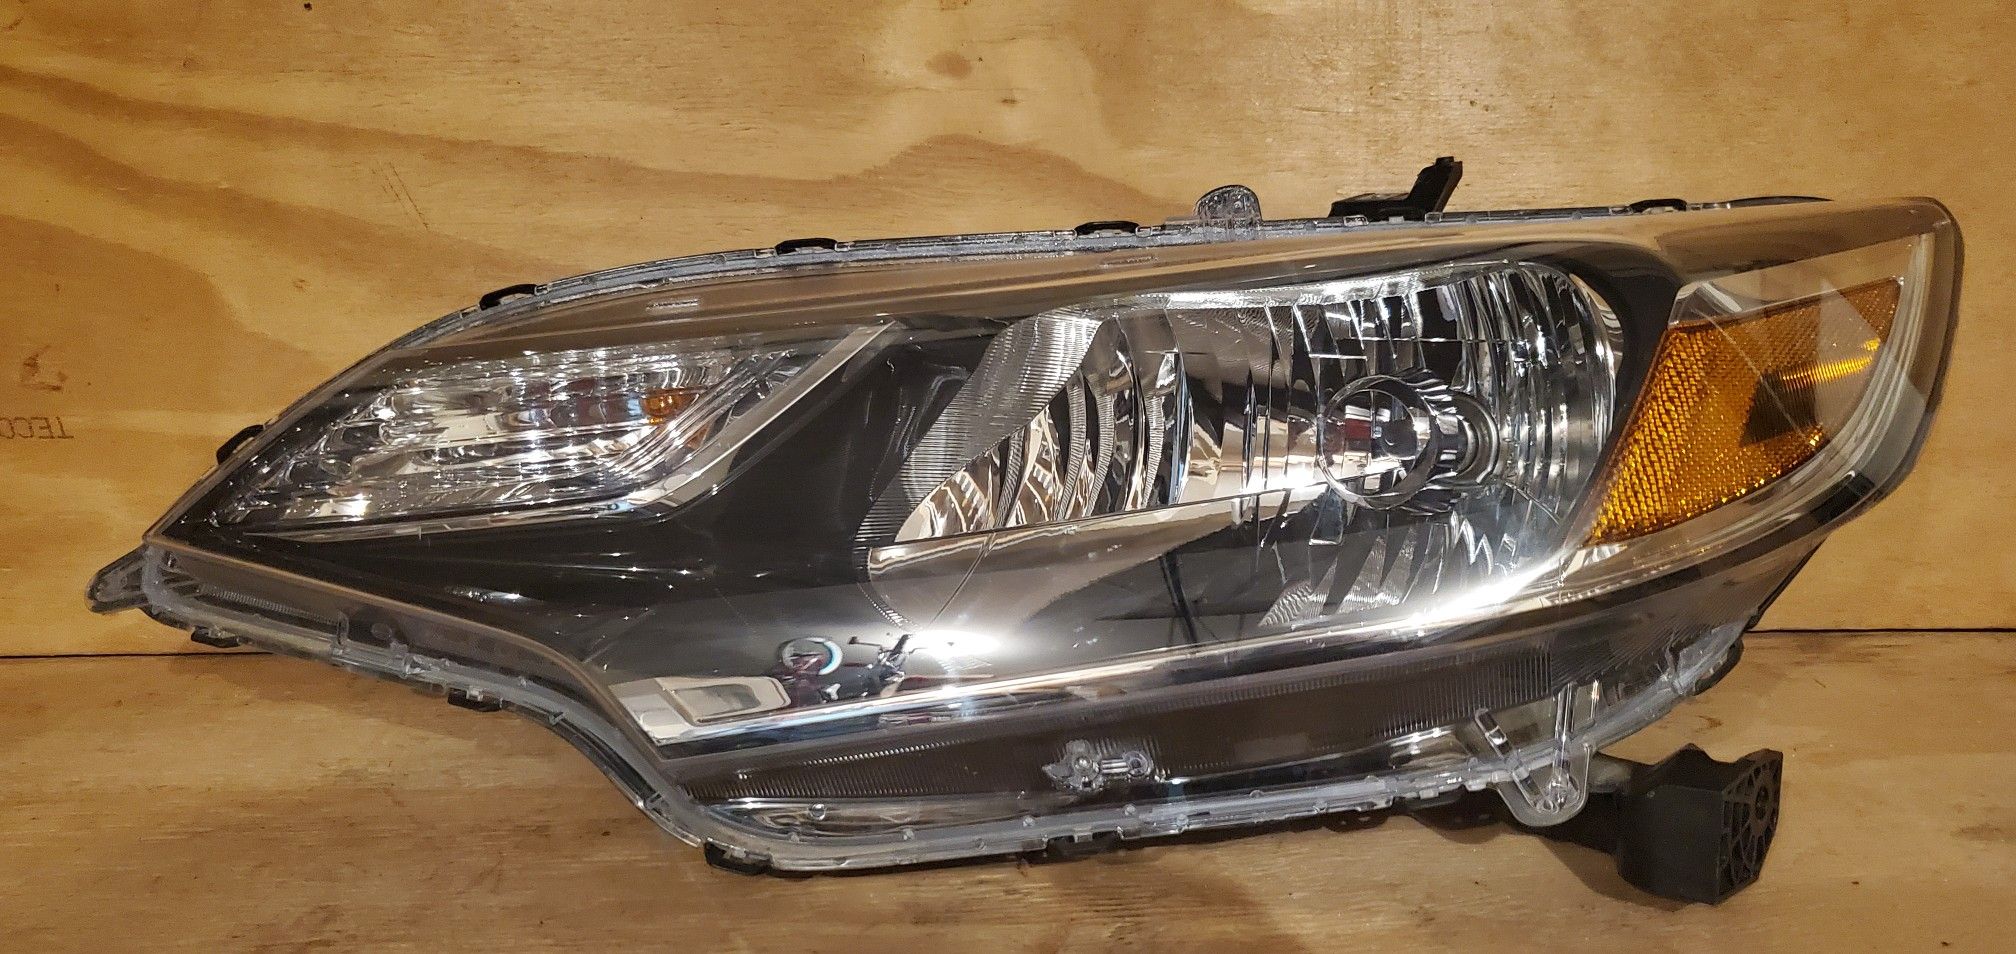 OEM Part # 33150 T5A A310 Front Left Driver Side LH Headlight Headlamp for 2018 to 2019 Honda Fit